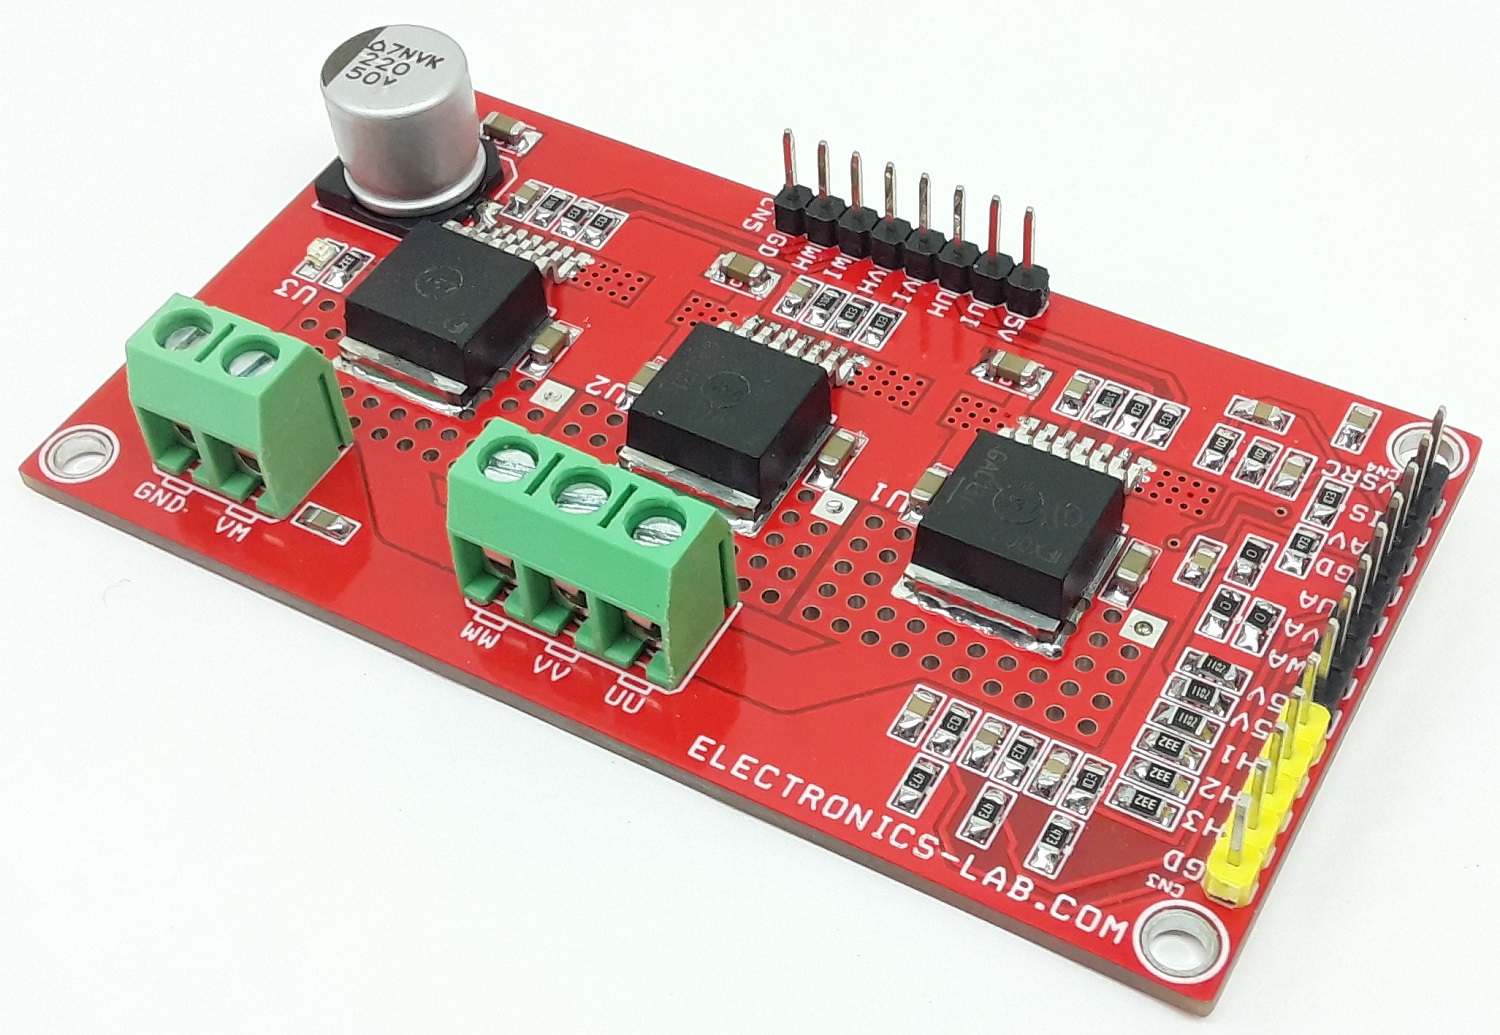 BLDC Motor and DC Brushed Motor Driver